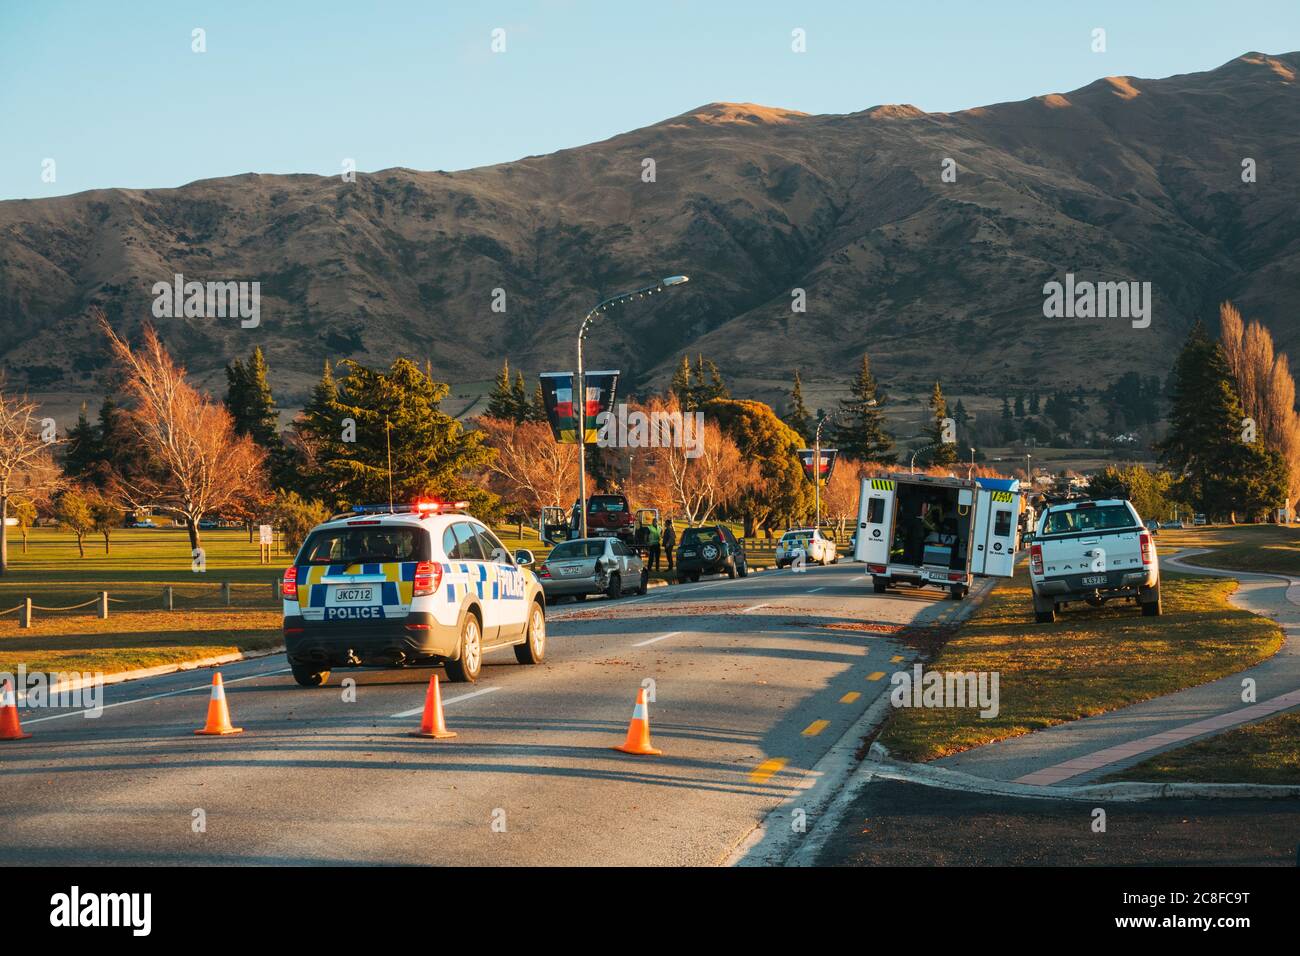 A Holden Captiva police vehicle blocks the road at a car crash in the middle of Wanaka township, New Zealand Stock Photo